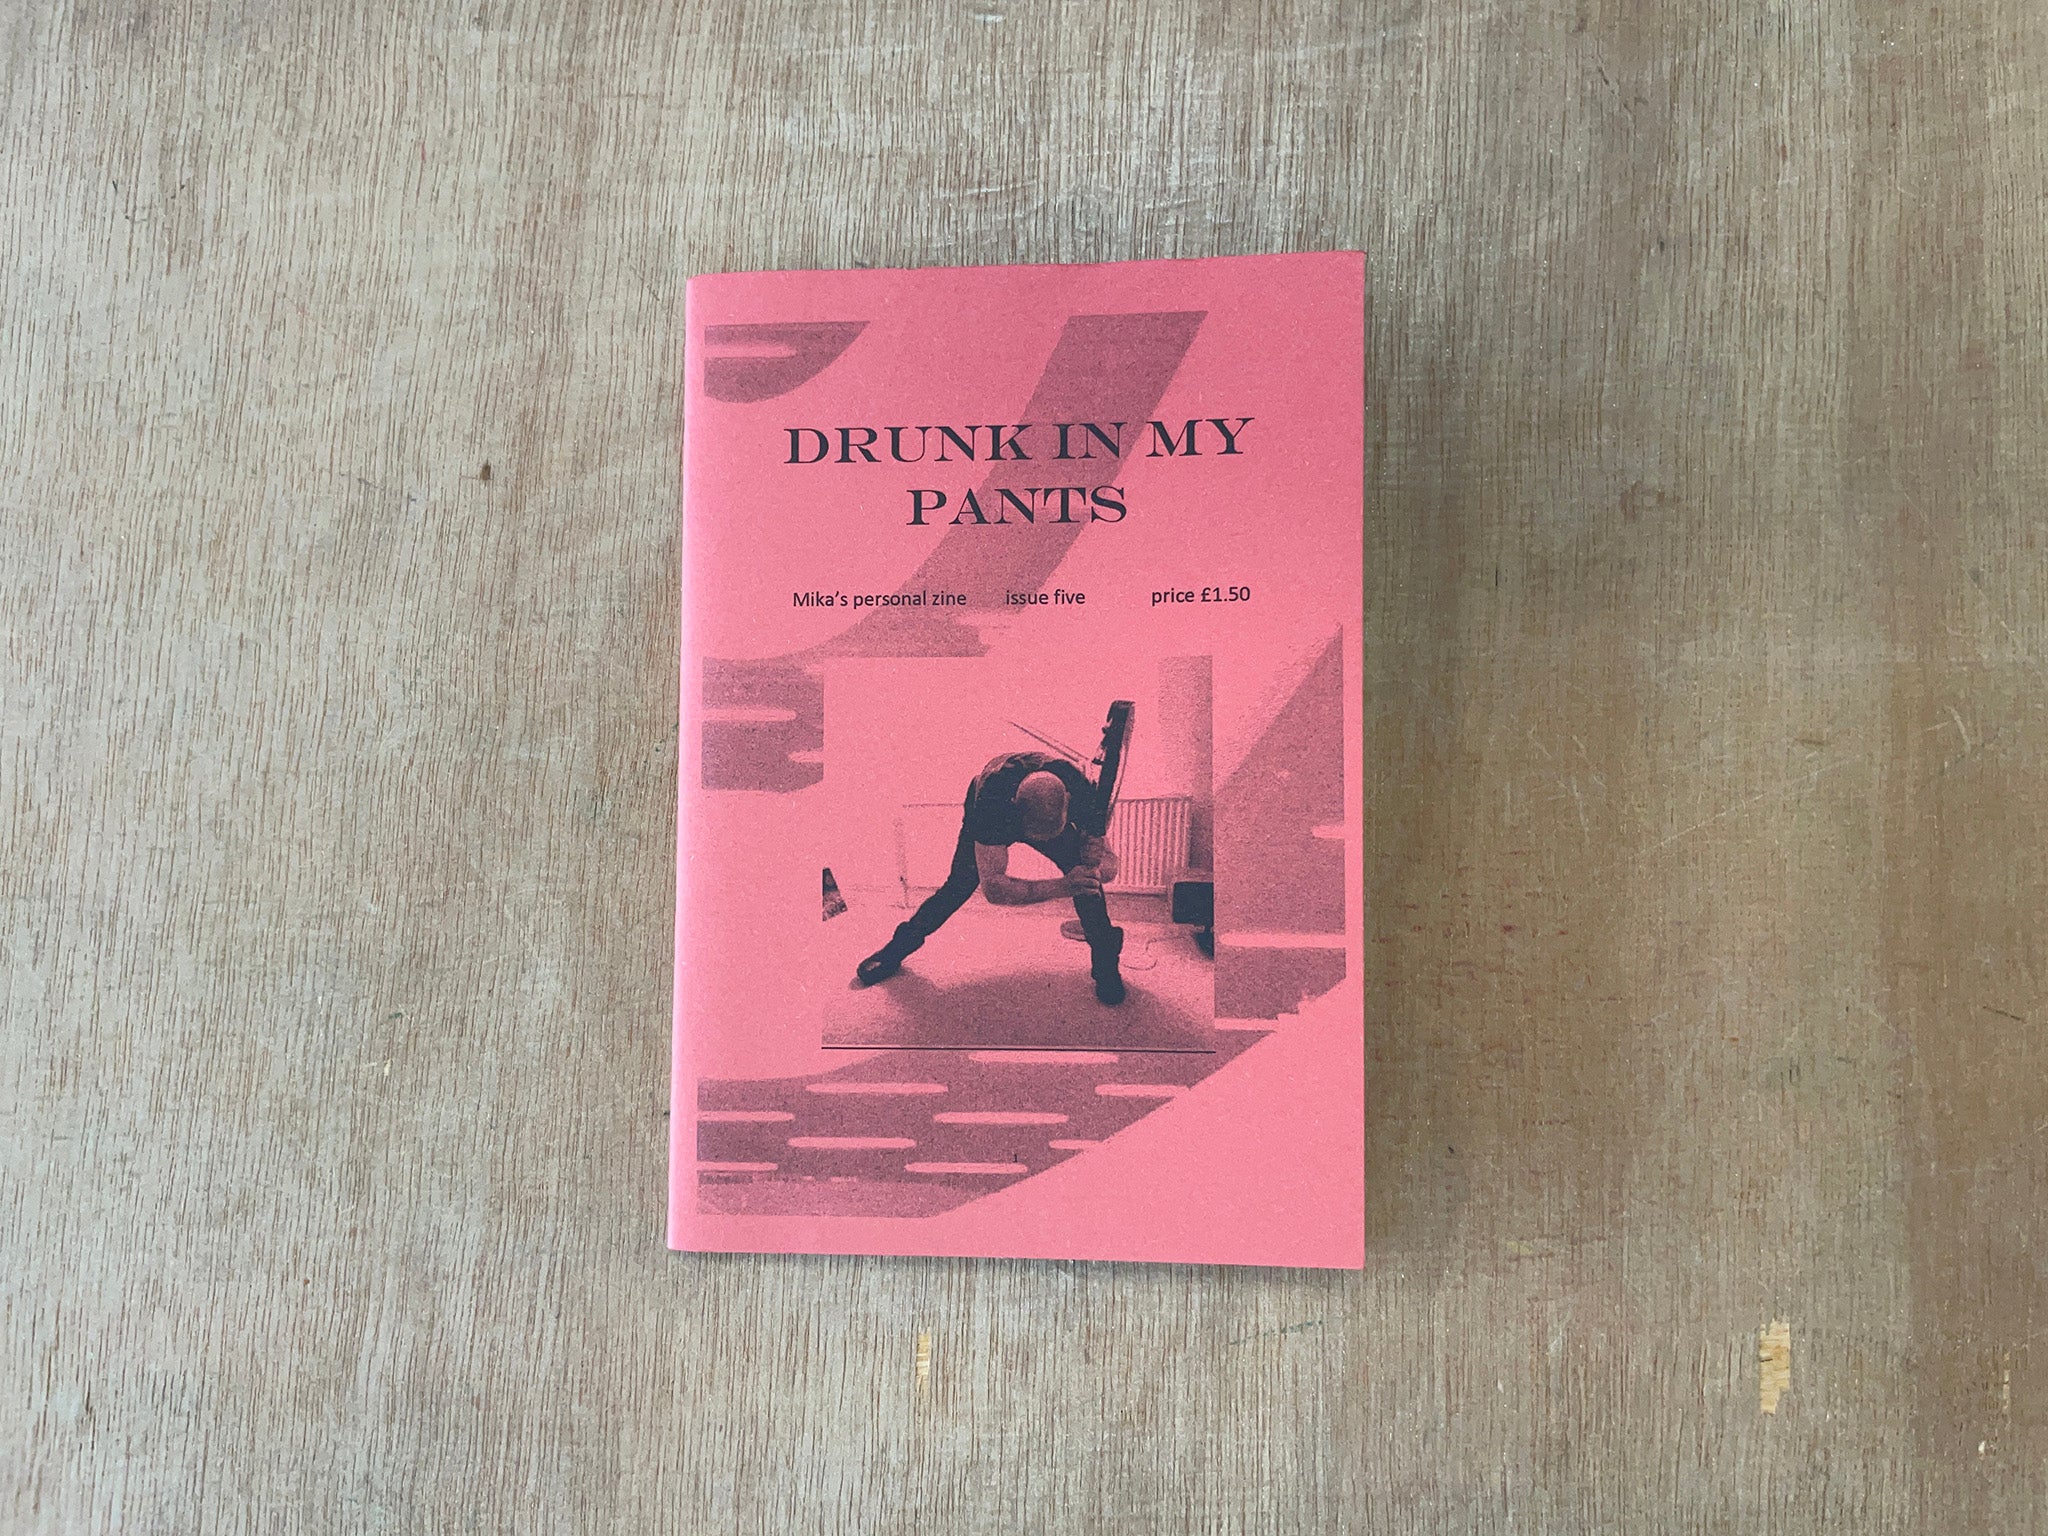 DRUNK IN MY PANTS (ISSUE 5) by Mika Gratzke